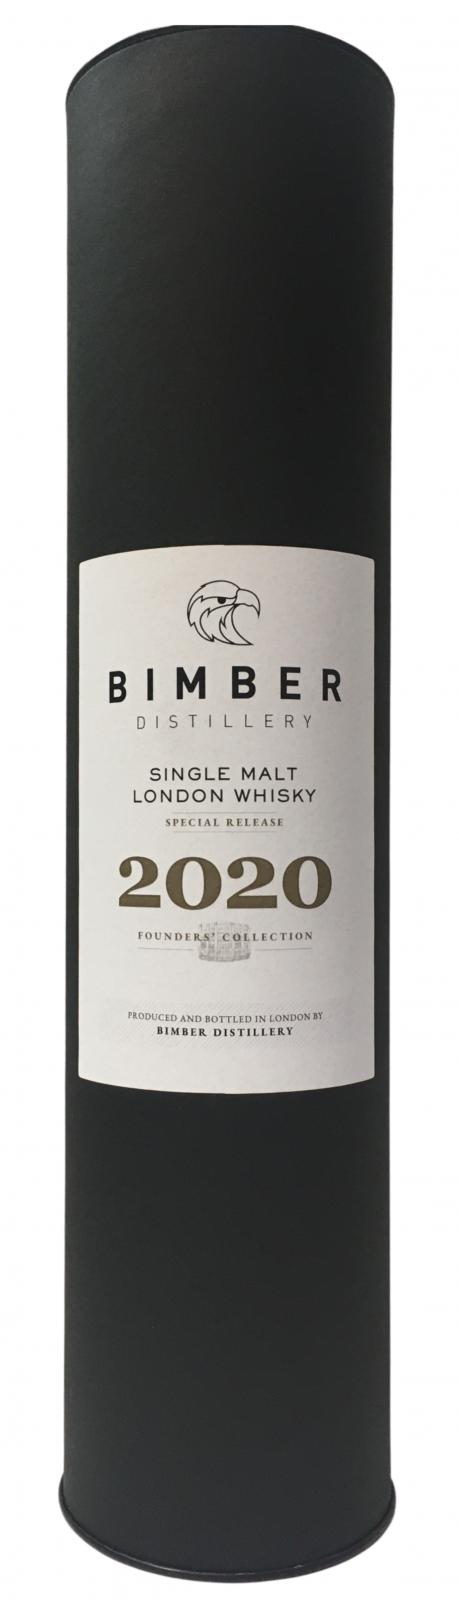 Bimber Founders’ Collection